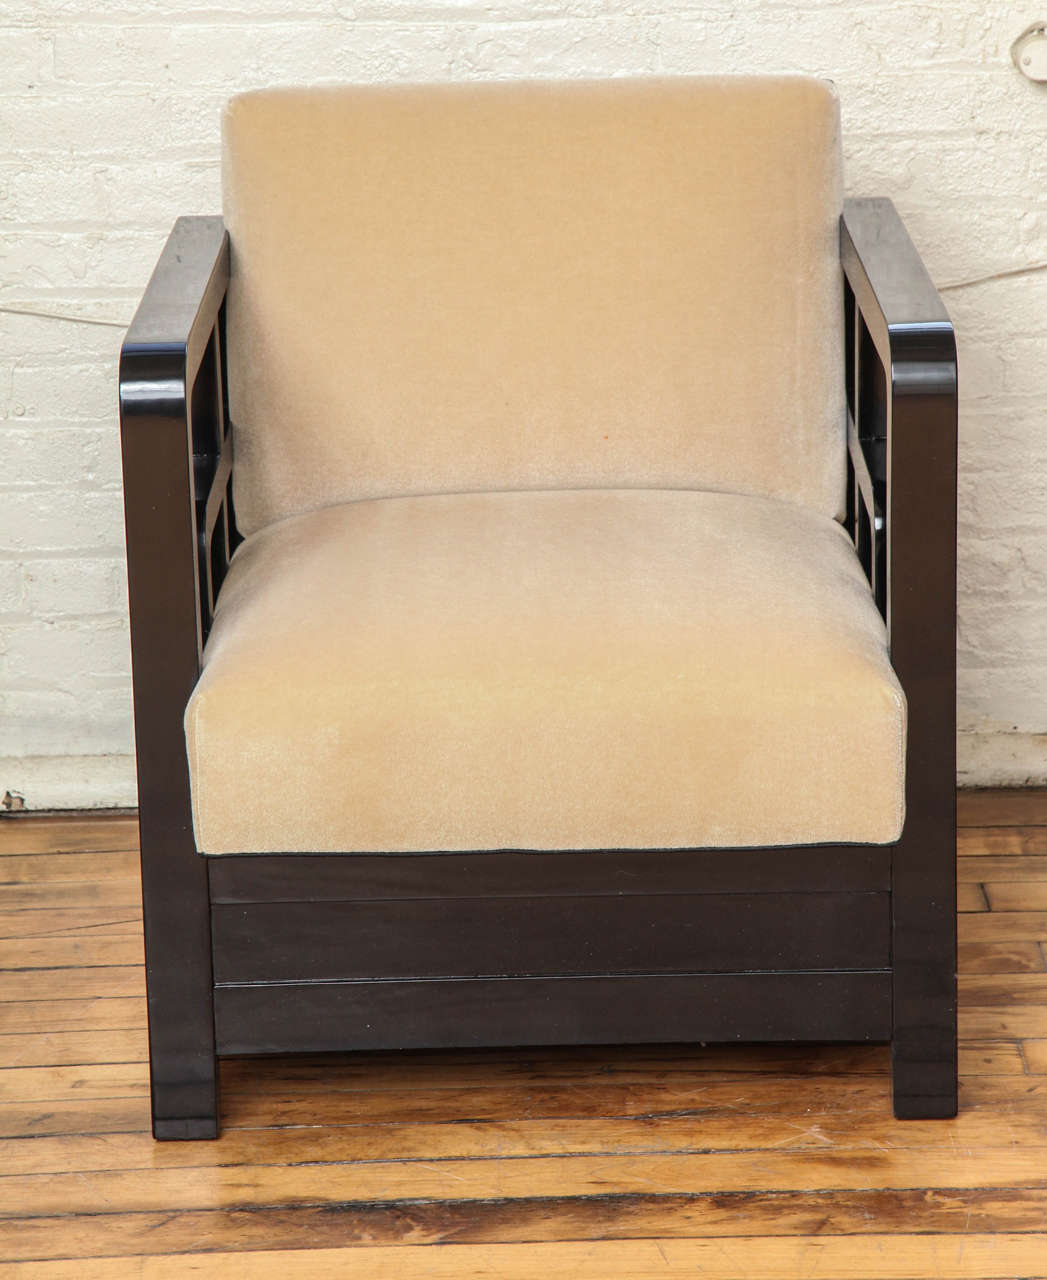 A pair of Asian inspired Art Deco armchairs in ebonized wood.